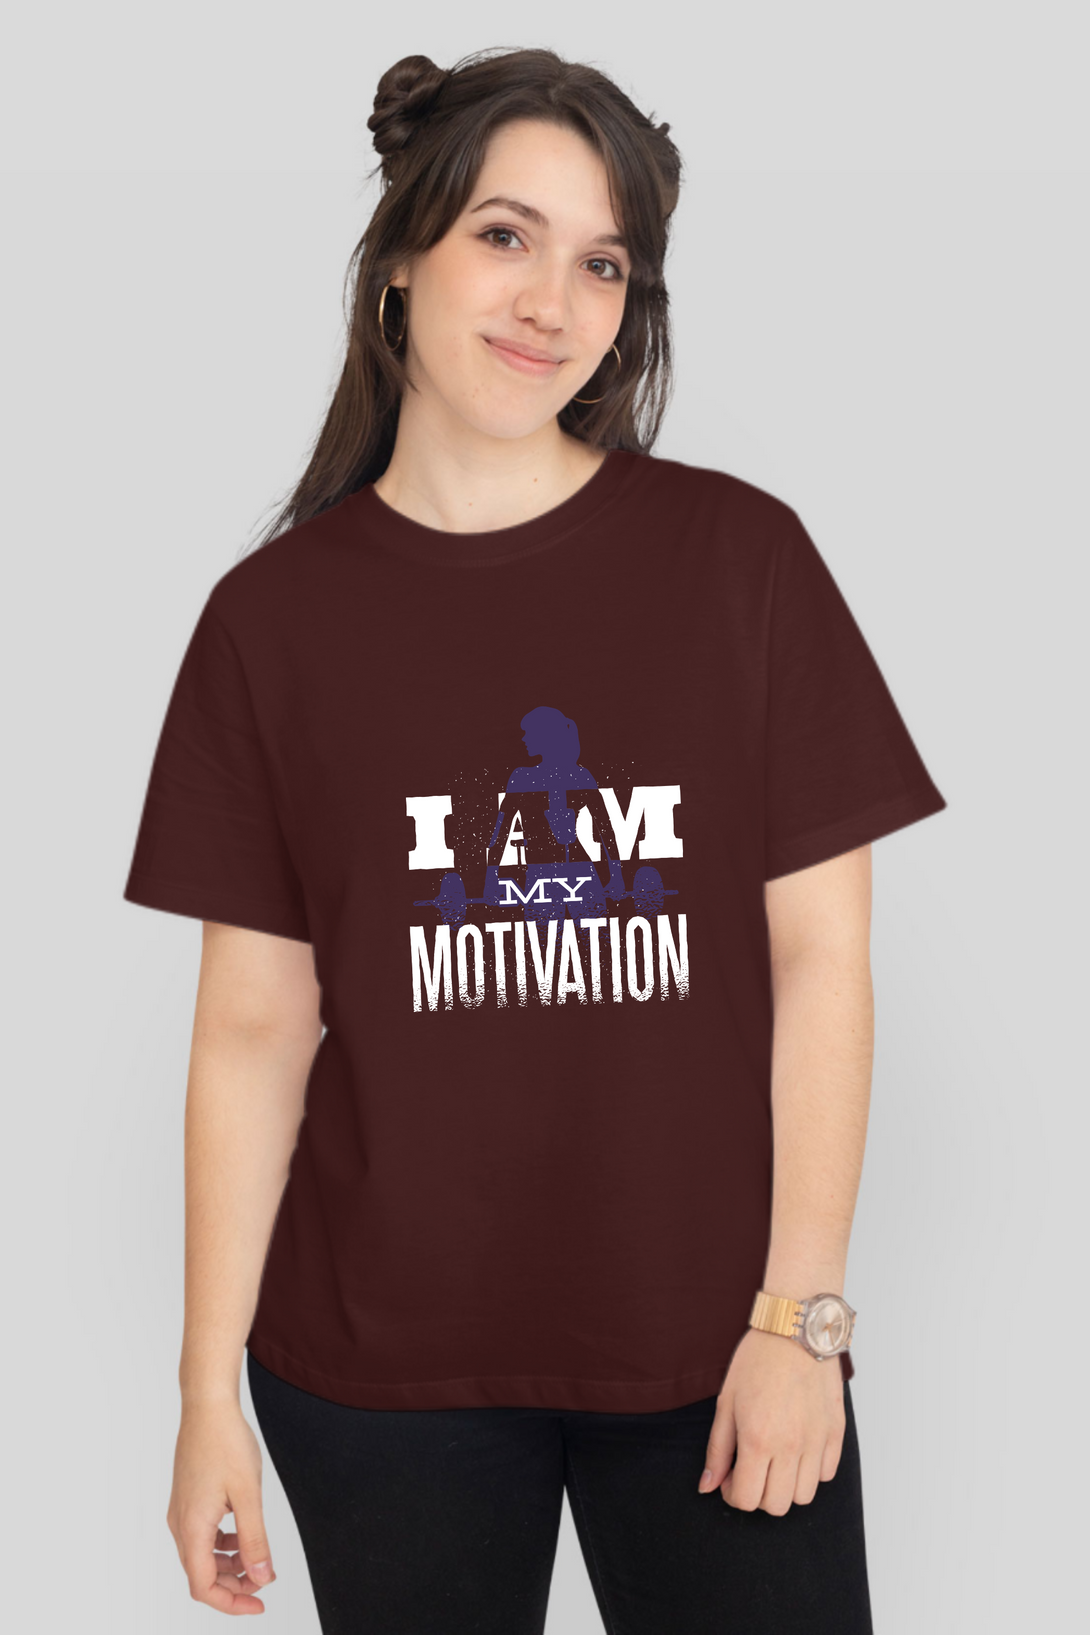 I Am My Motivation Printed T-Shirt For Women - WowWaves - 9